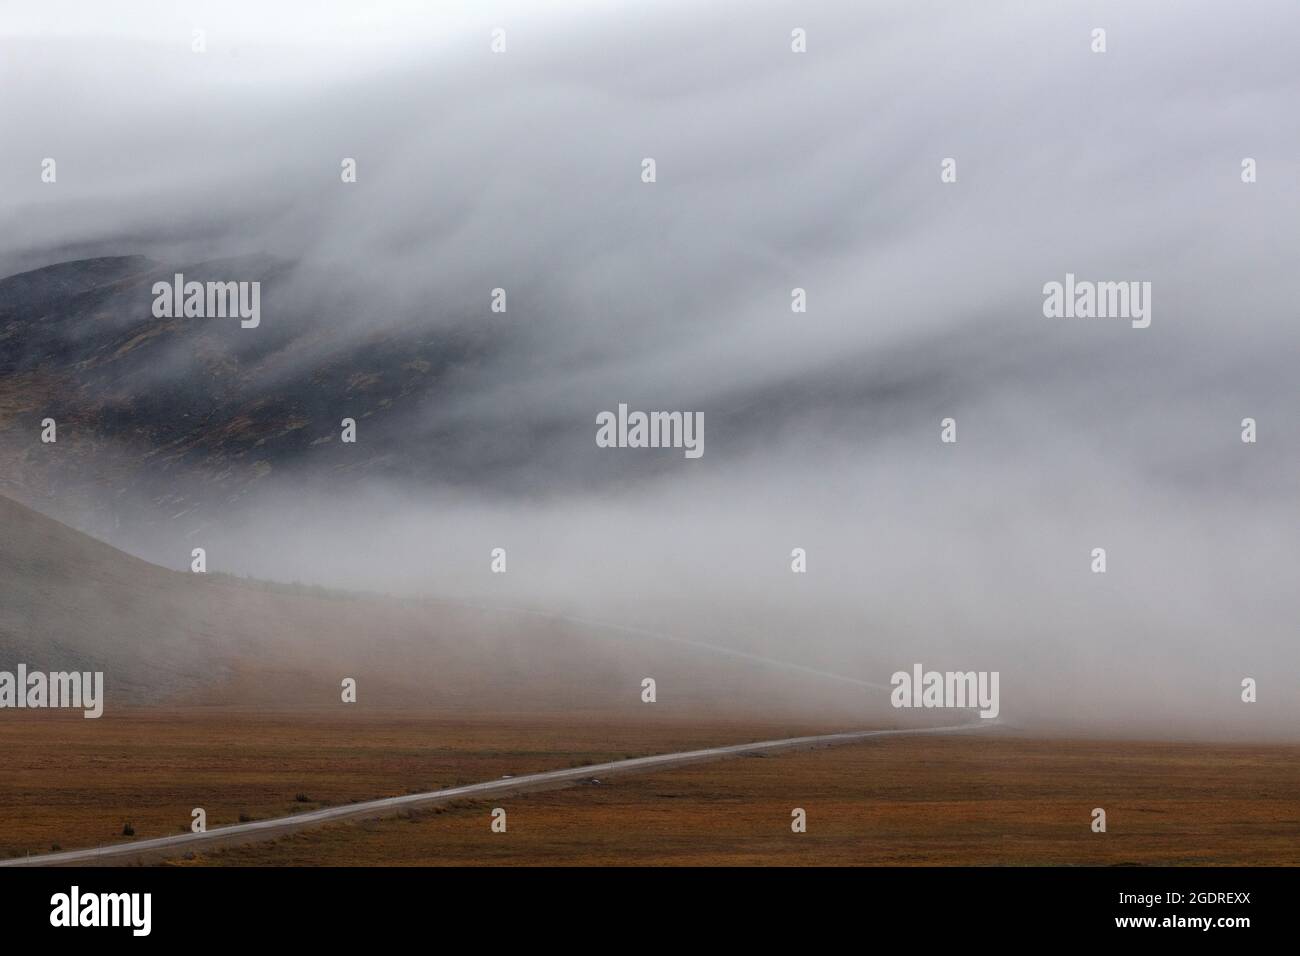 Low, misty clouds cling to the autumn tundra along the desolate Dempster Highway in the Yukon Territory, Canada. Stock Photo